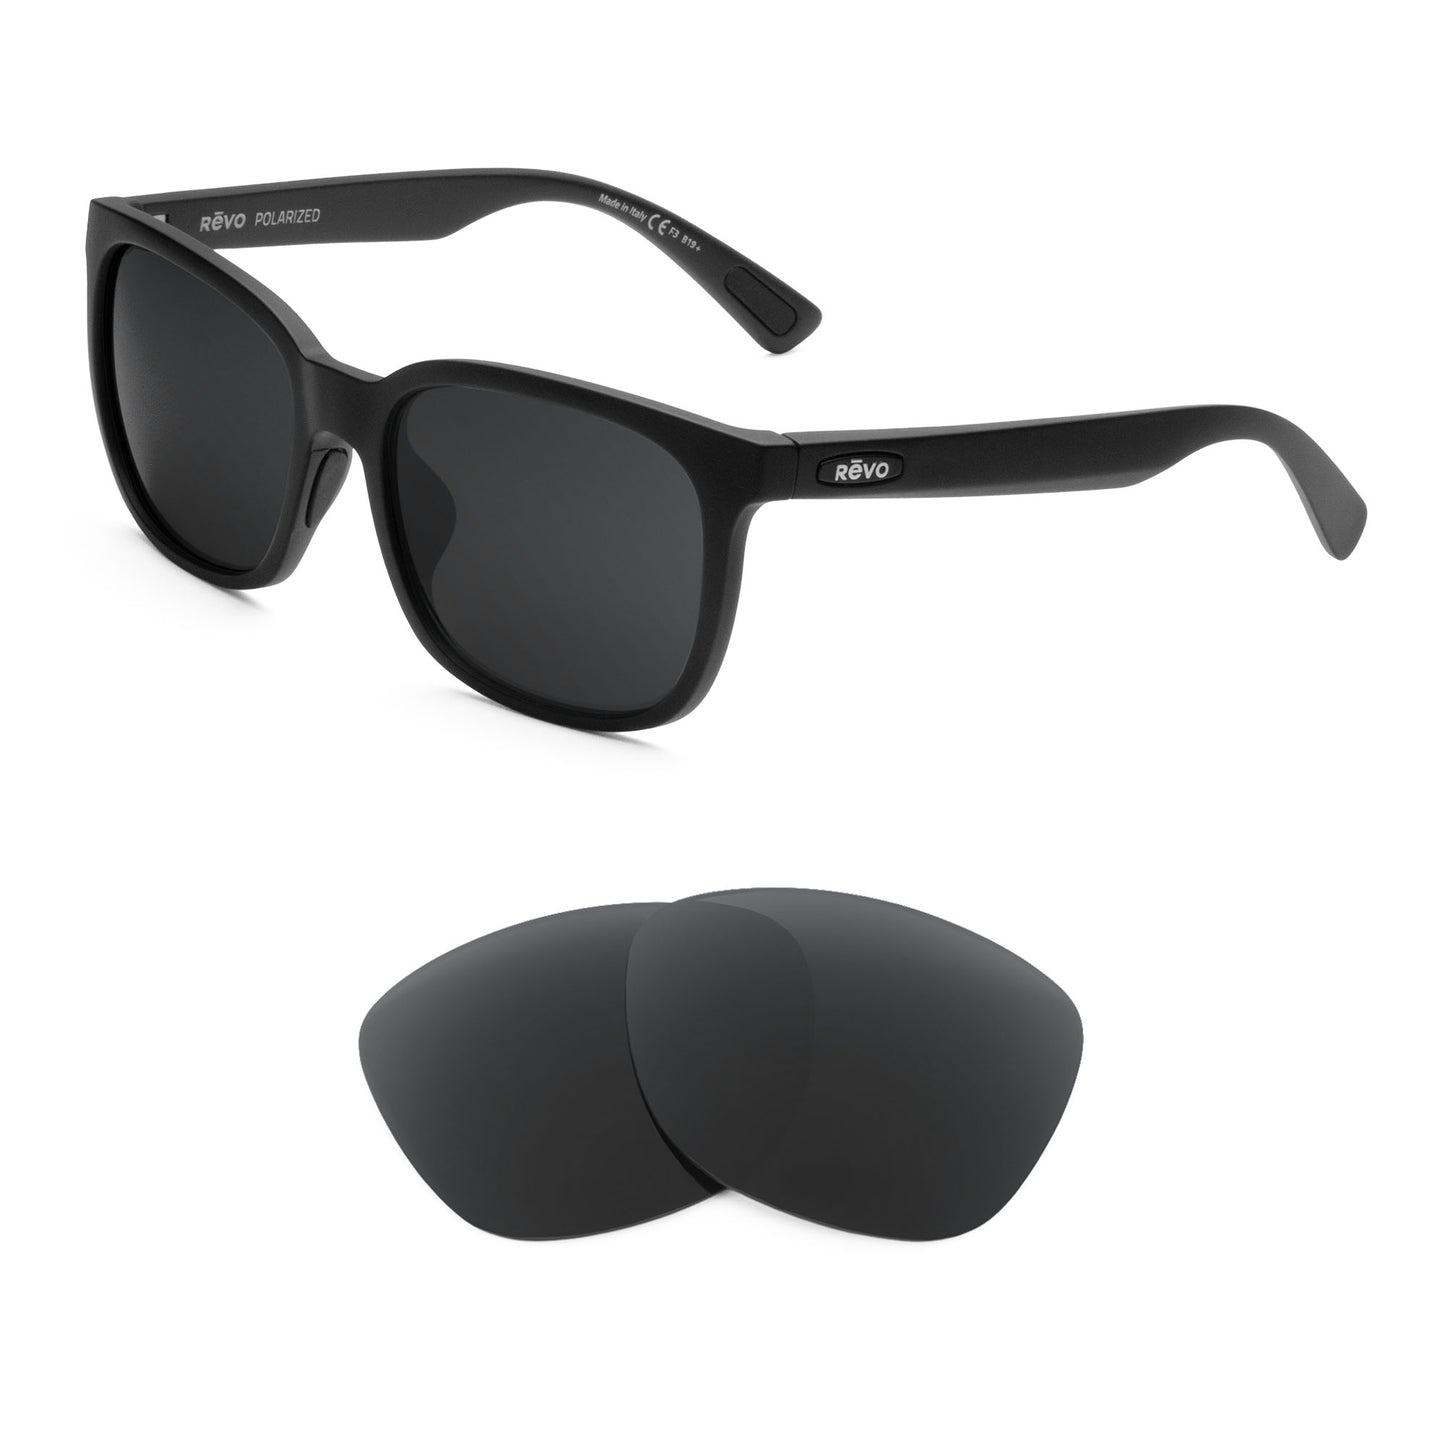 Revo Slater sunglasses with replacement lenses